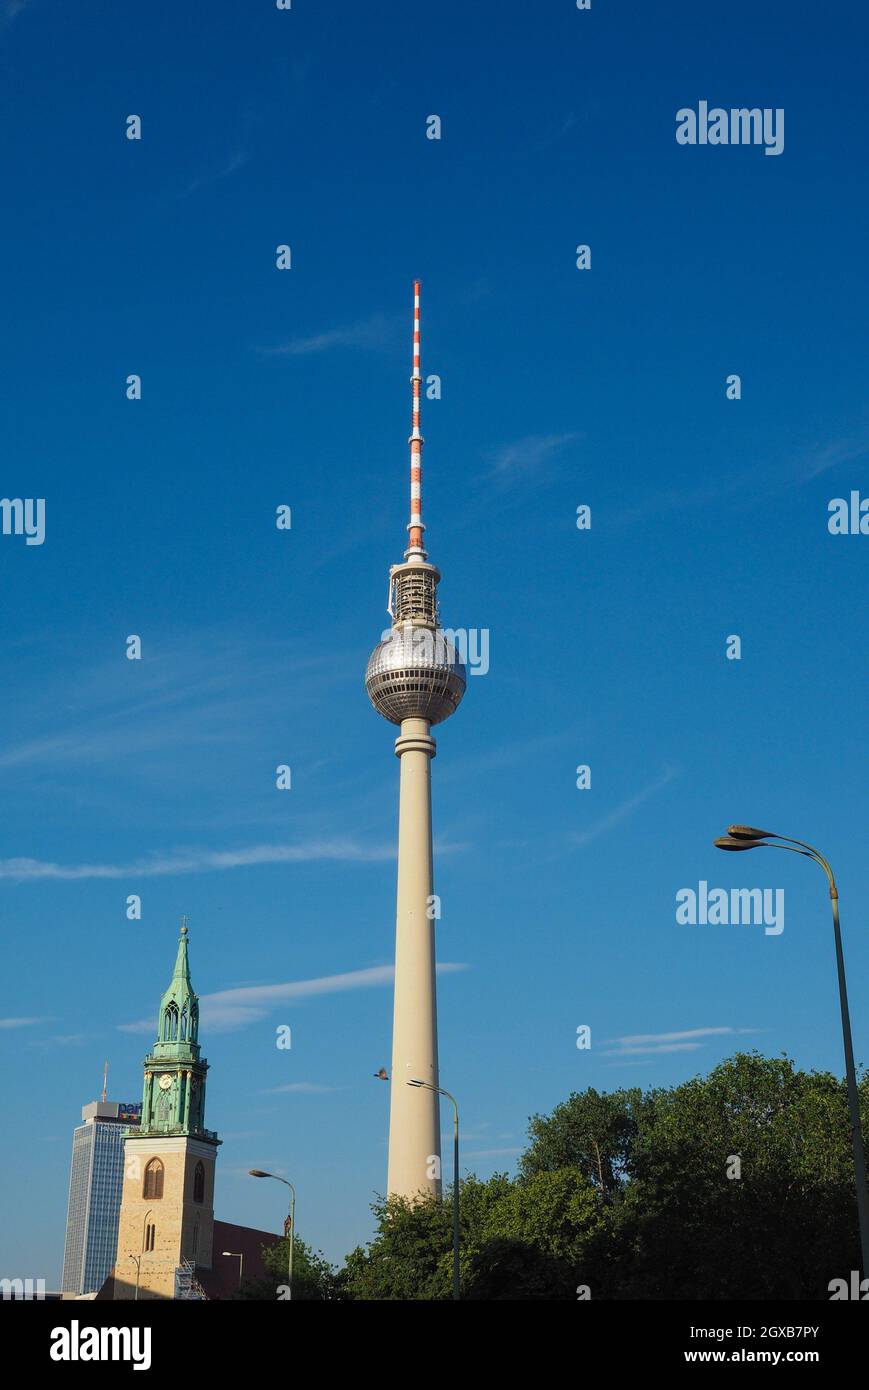 Fernsehturm (meaning Television tower) in Alexanderplatz in Berlin, Germany. Stock Photo